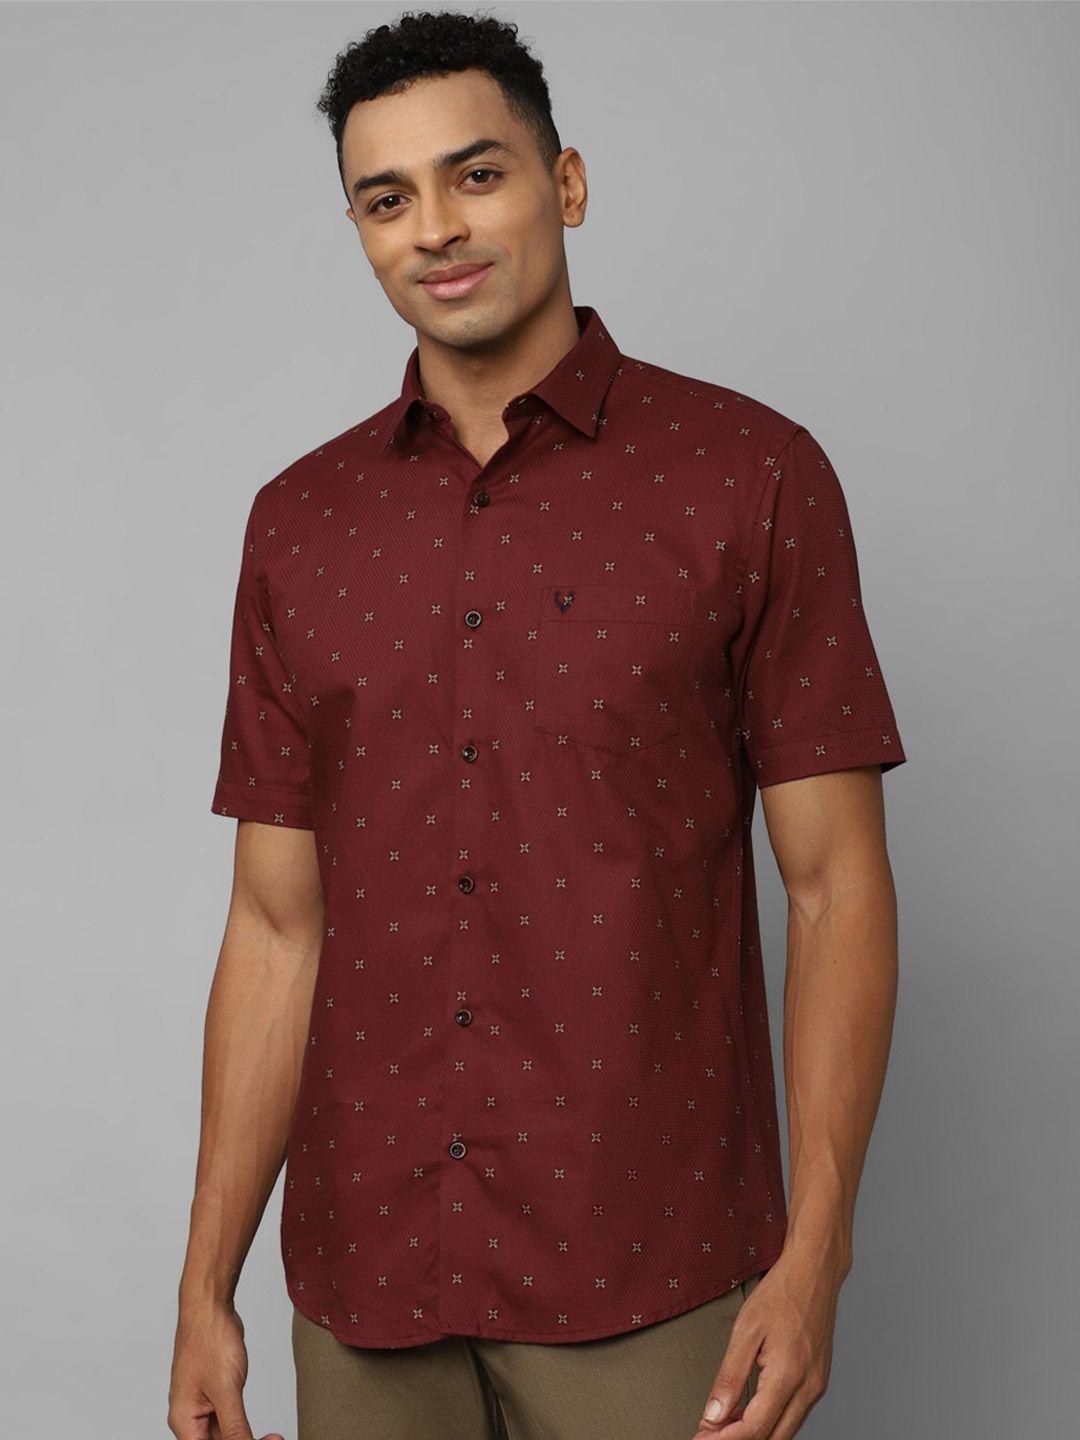 allen solly micro ditsy printed slim fit pure cotton casual shirt